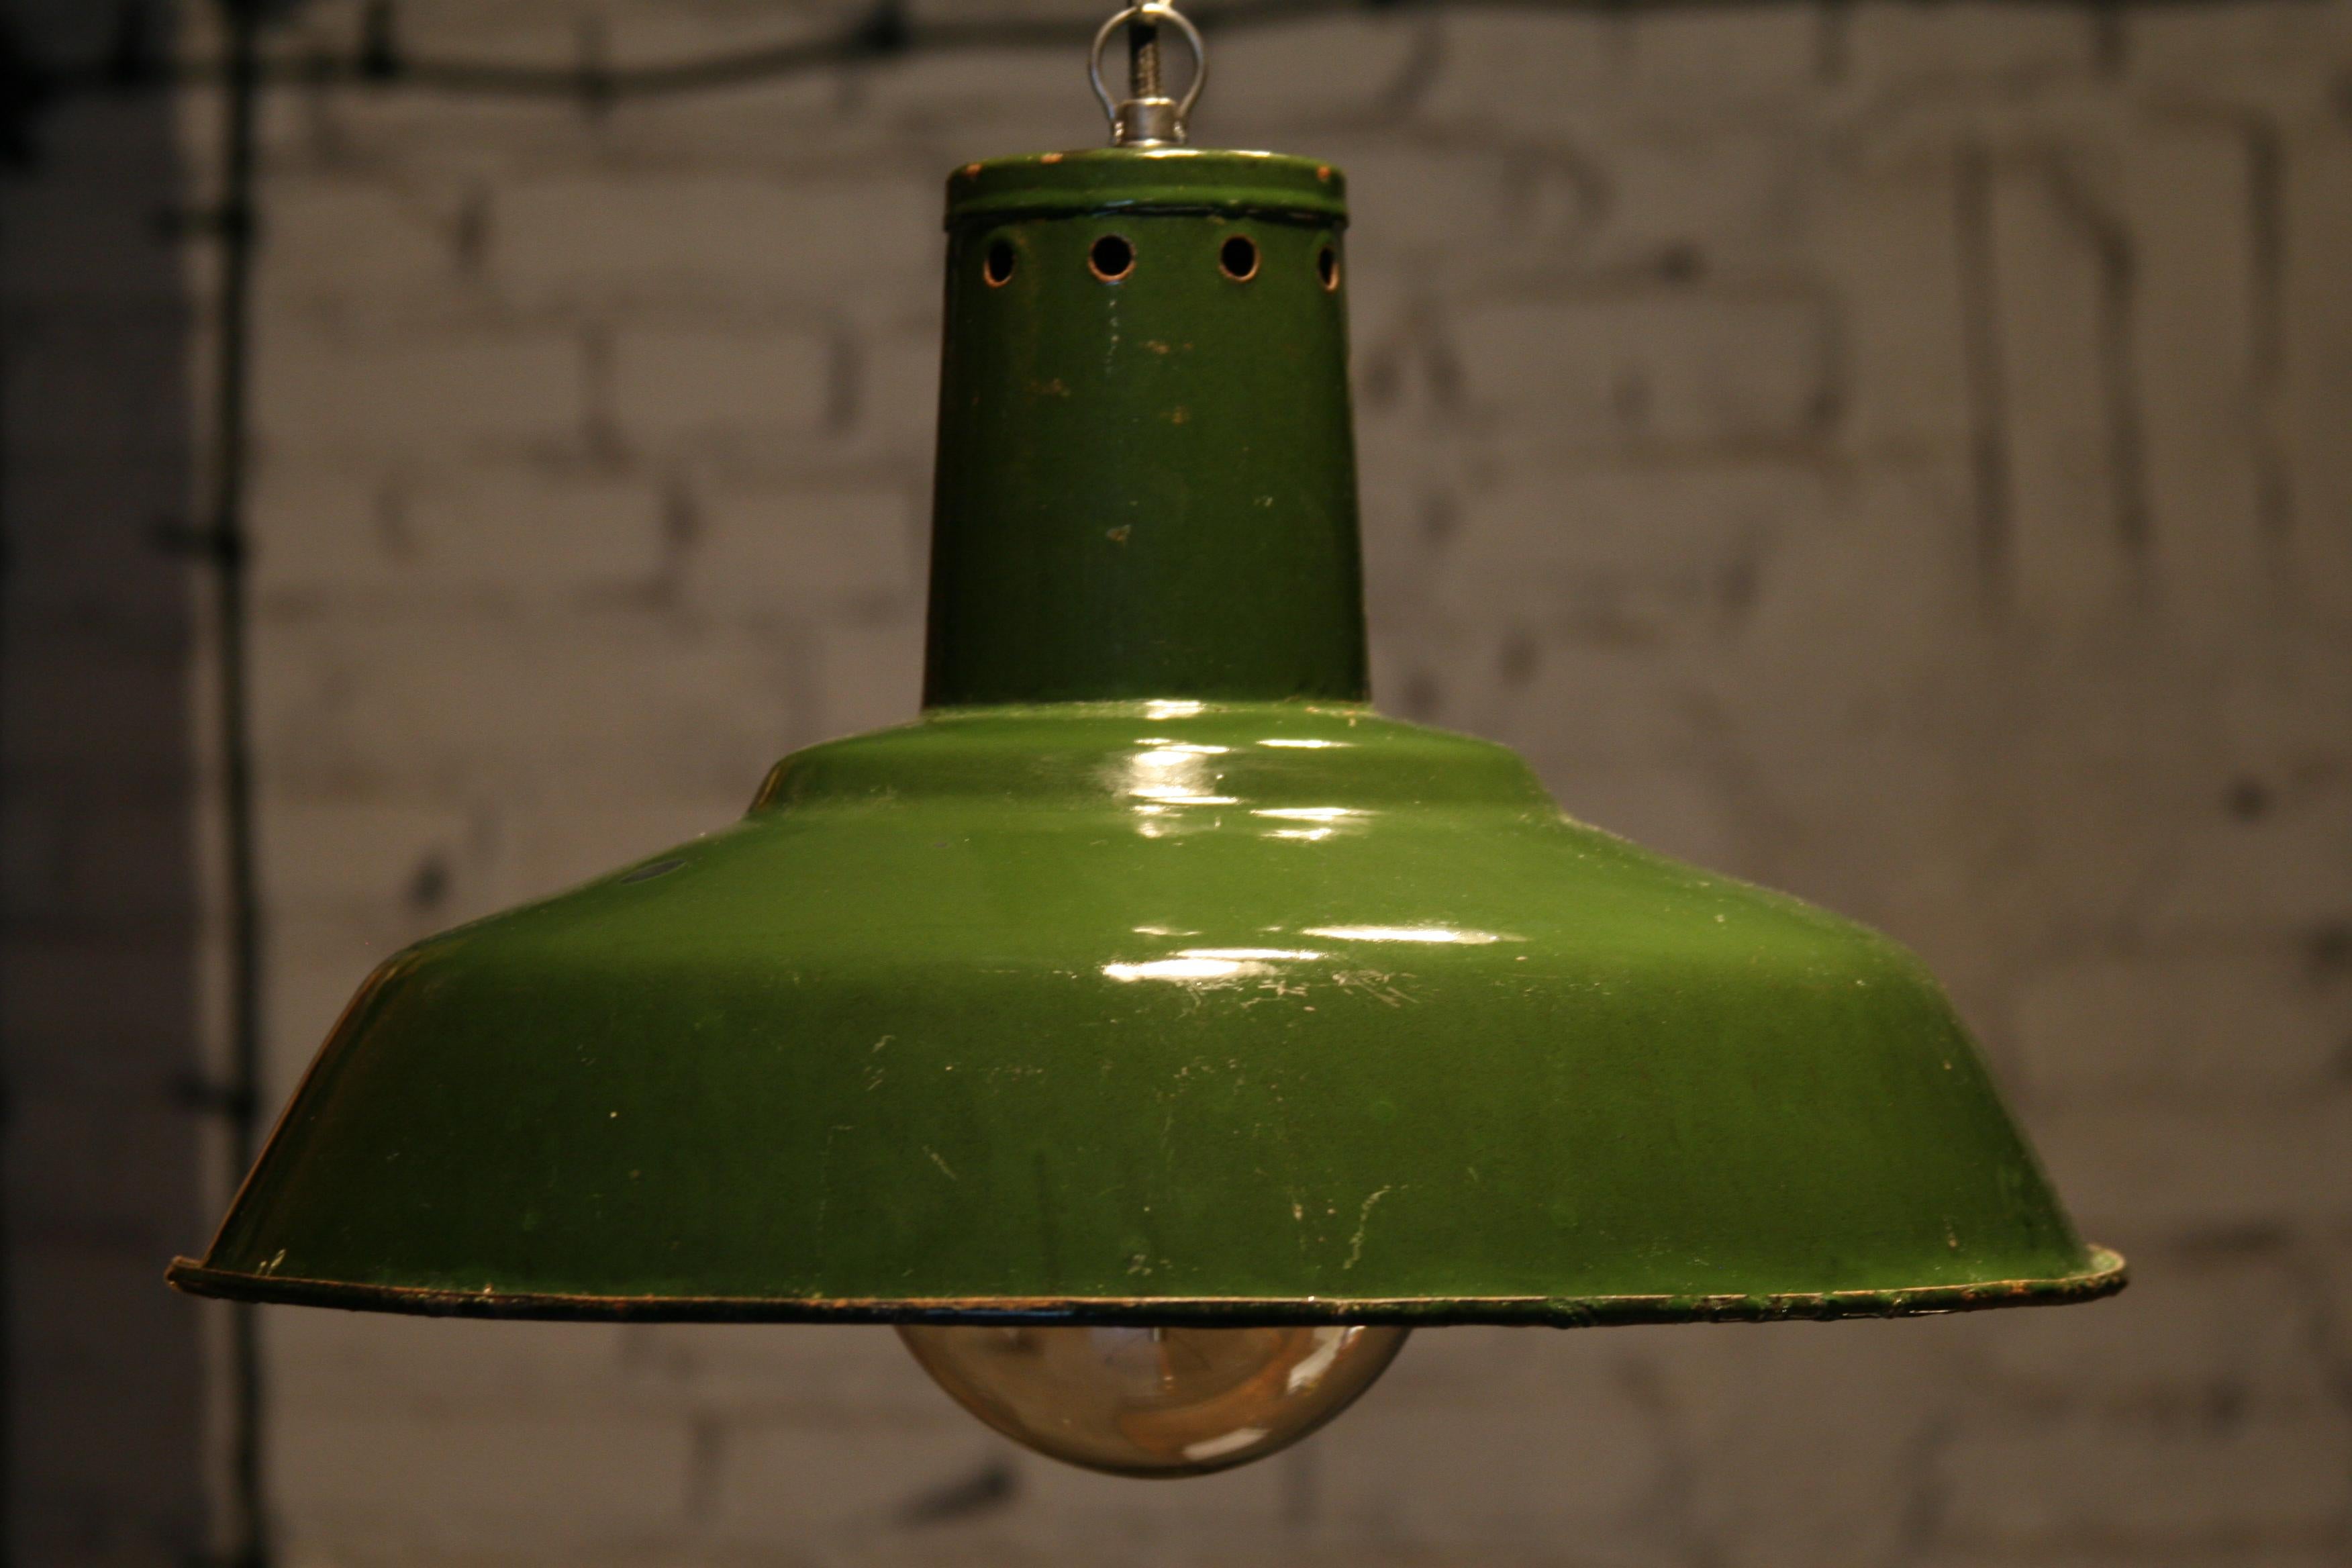 The original enamelled luminaire of Soviet production from the 1950s and 1960s.
Construction:
Three-part composite lampshade made of a deep pressed steel sheet, covered with two-colored enamel. The large diameter of the reflector guarantees an